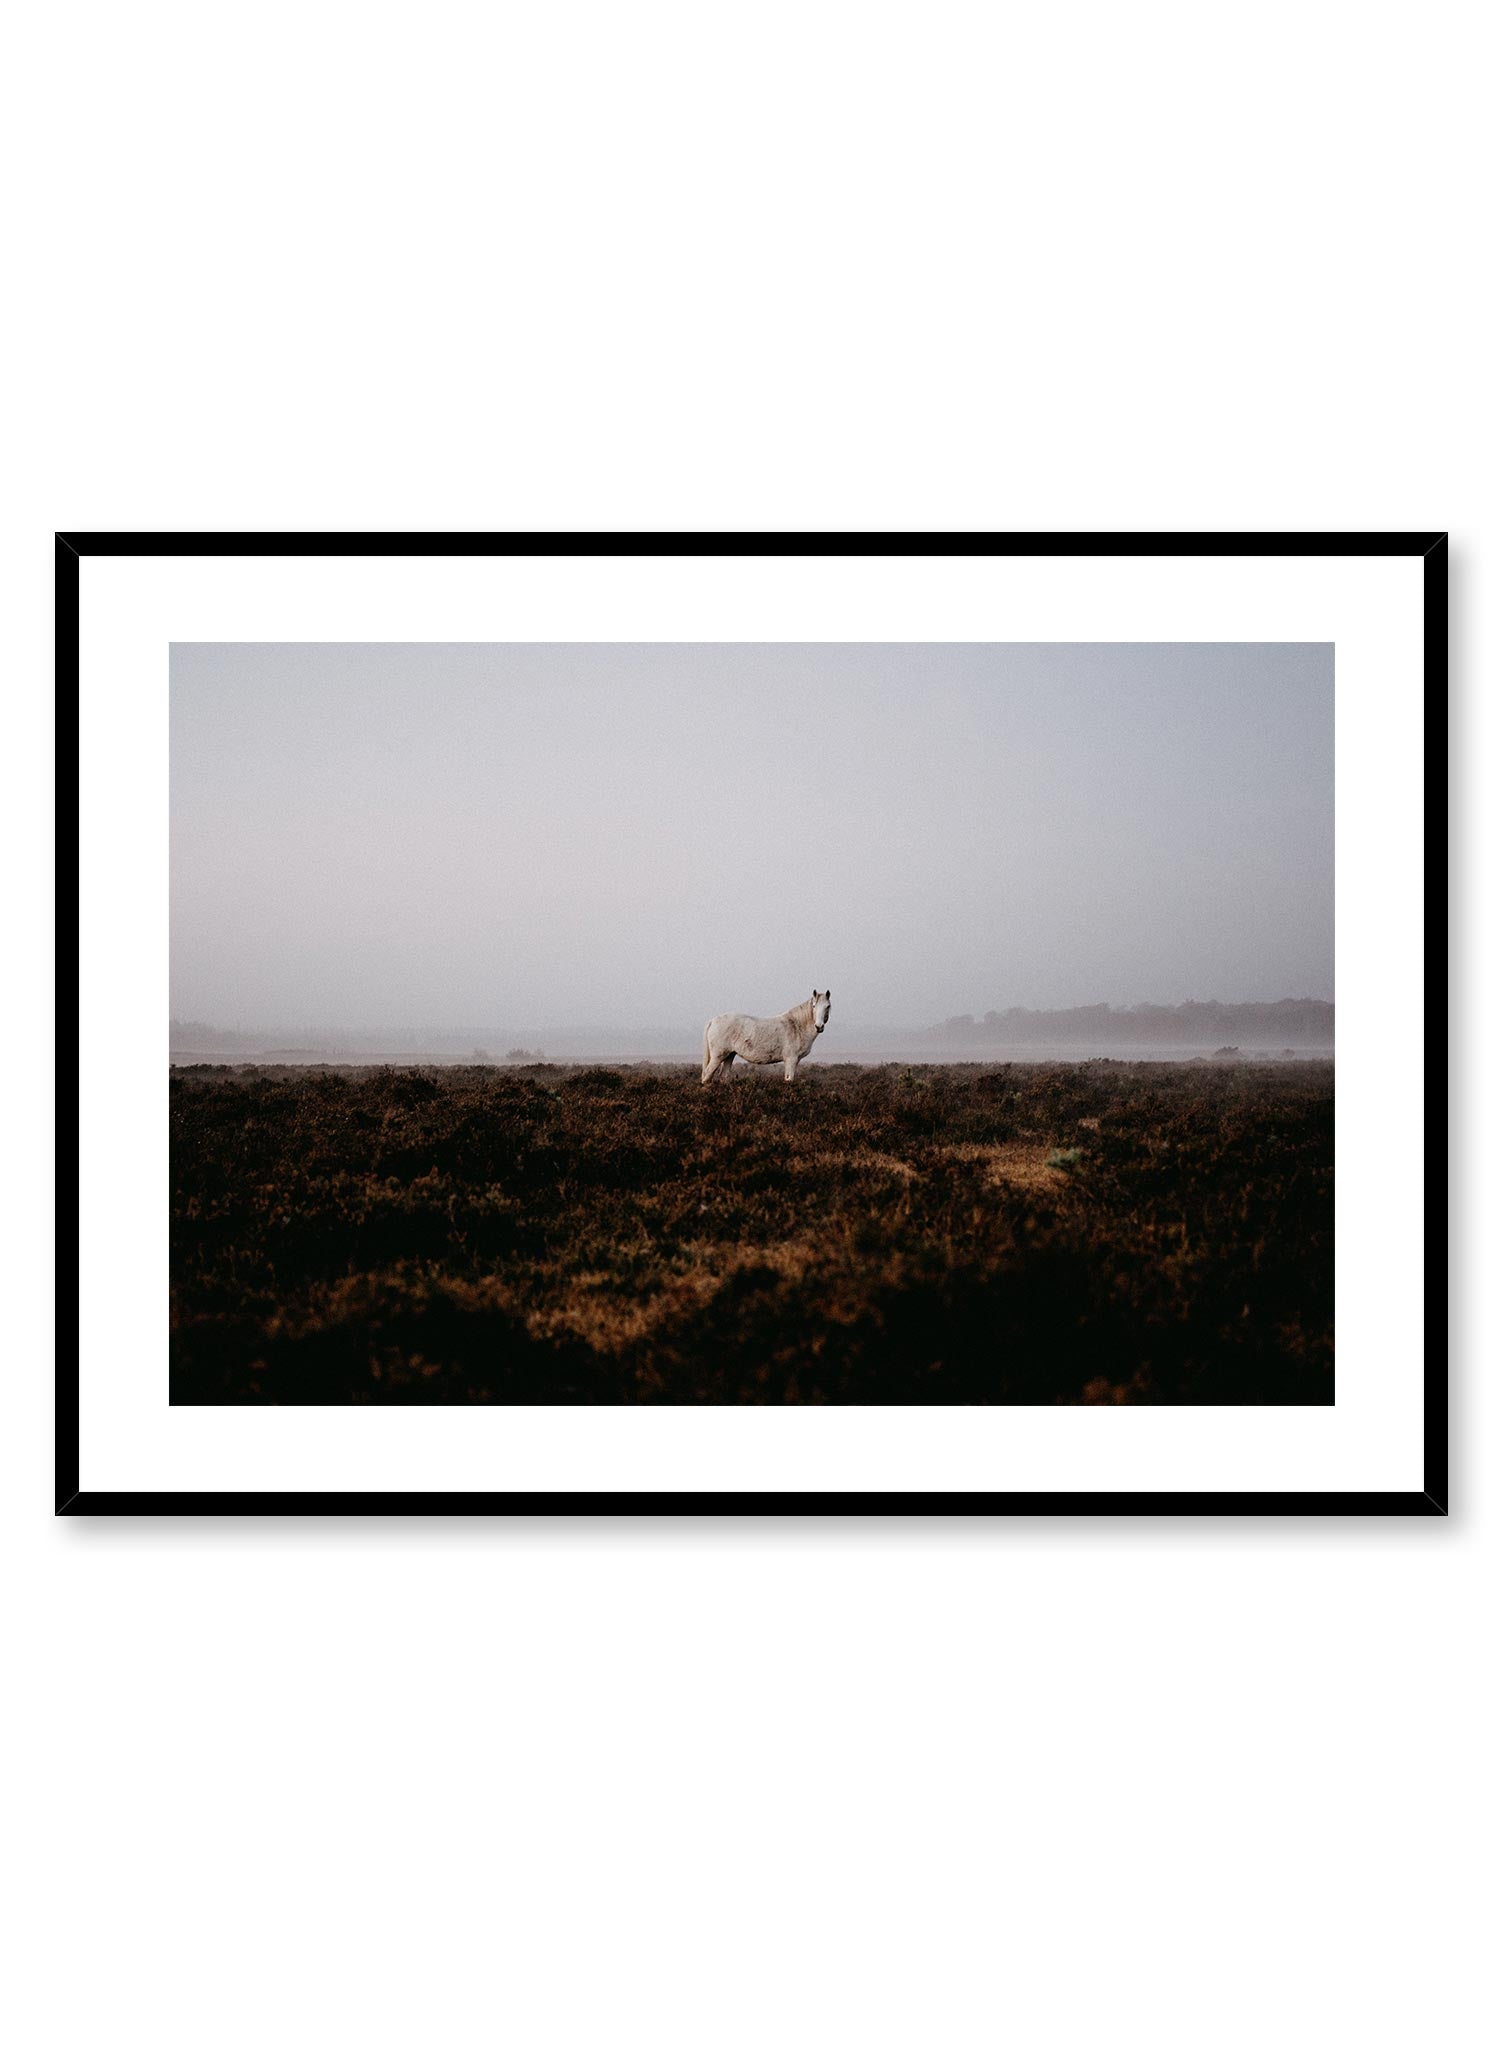 Wild Horse' is an animal and landscape photography poster by Opposite Wall of a wild white horse standing in a vast and foggy field with distant mountains.